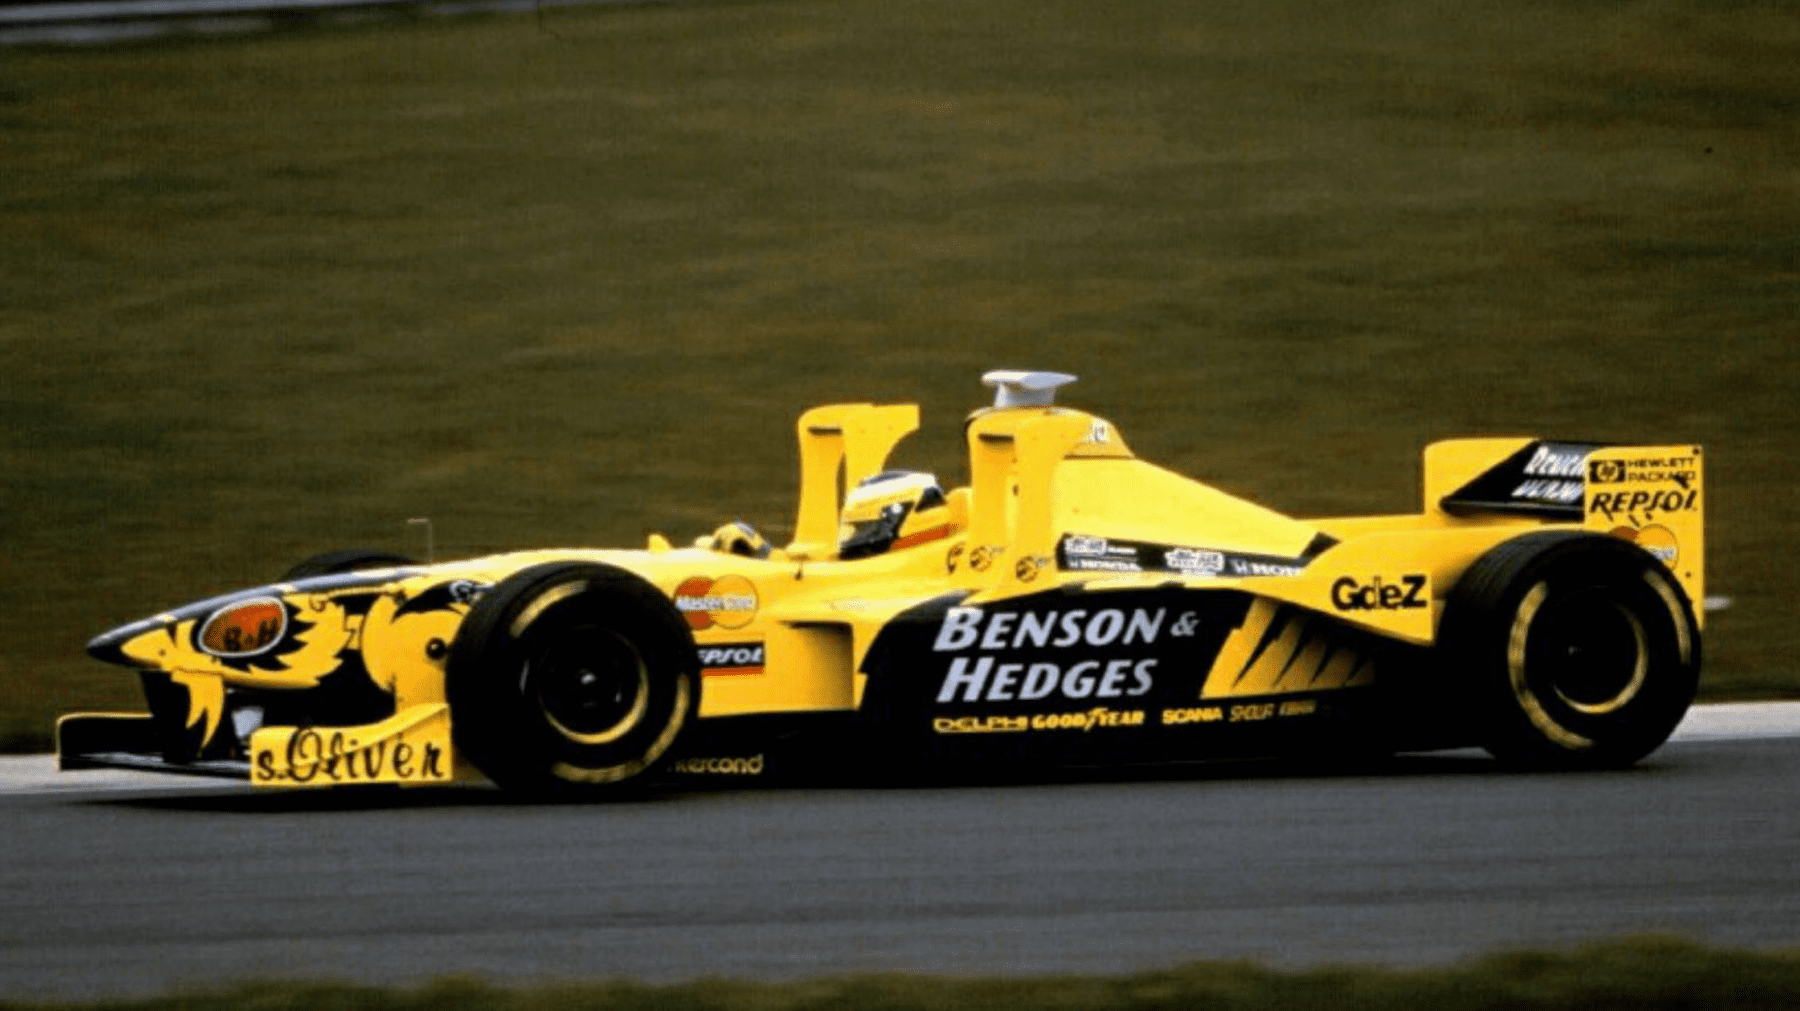 The history of F1 Racing and Tobacco Companies